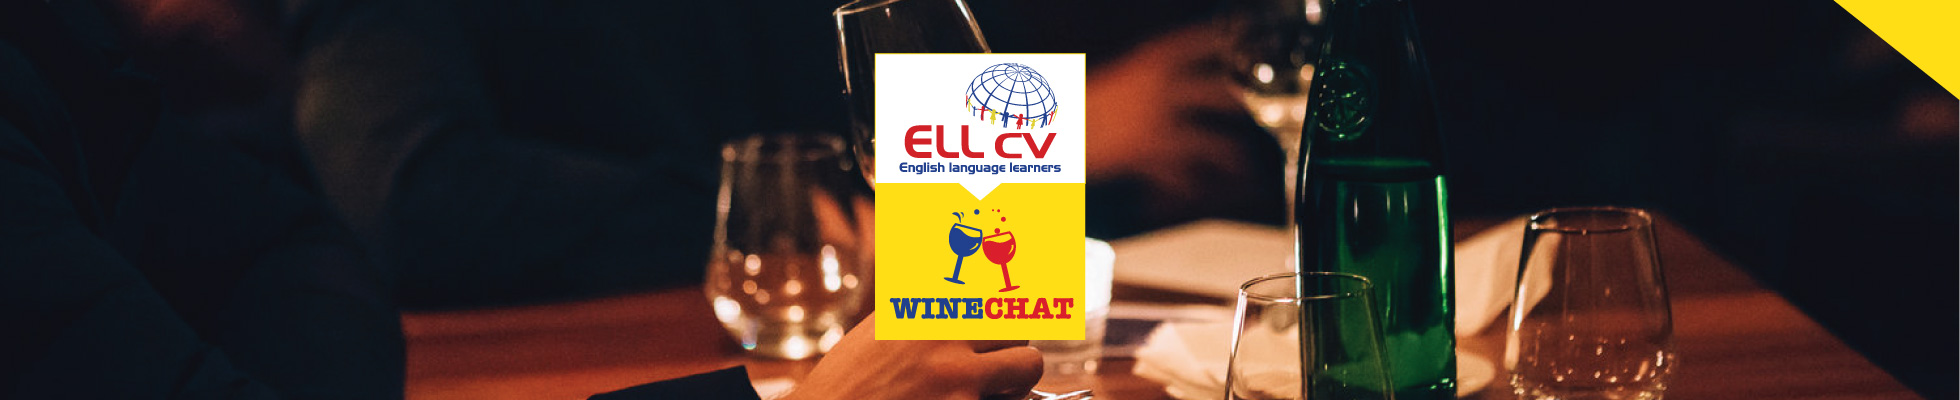 banner wine chat